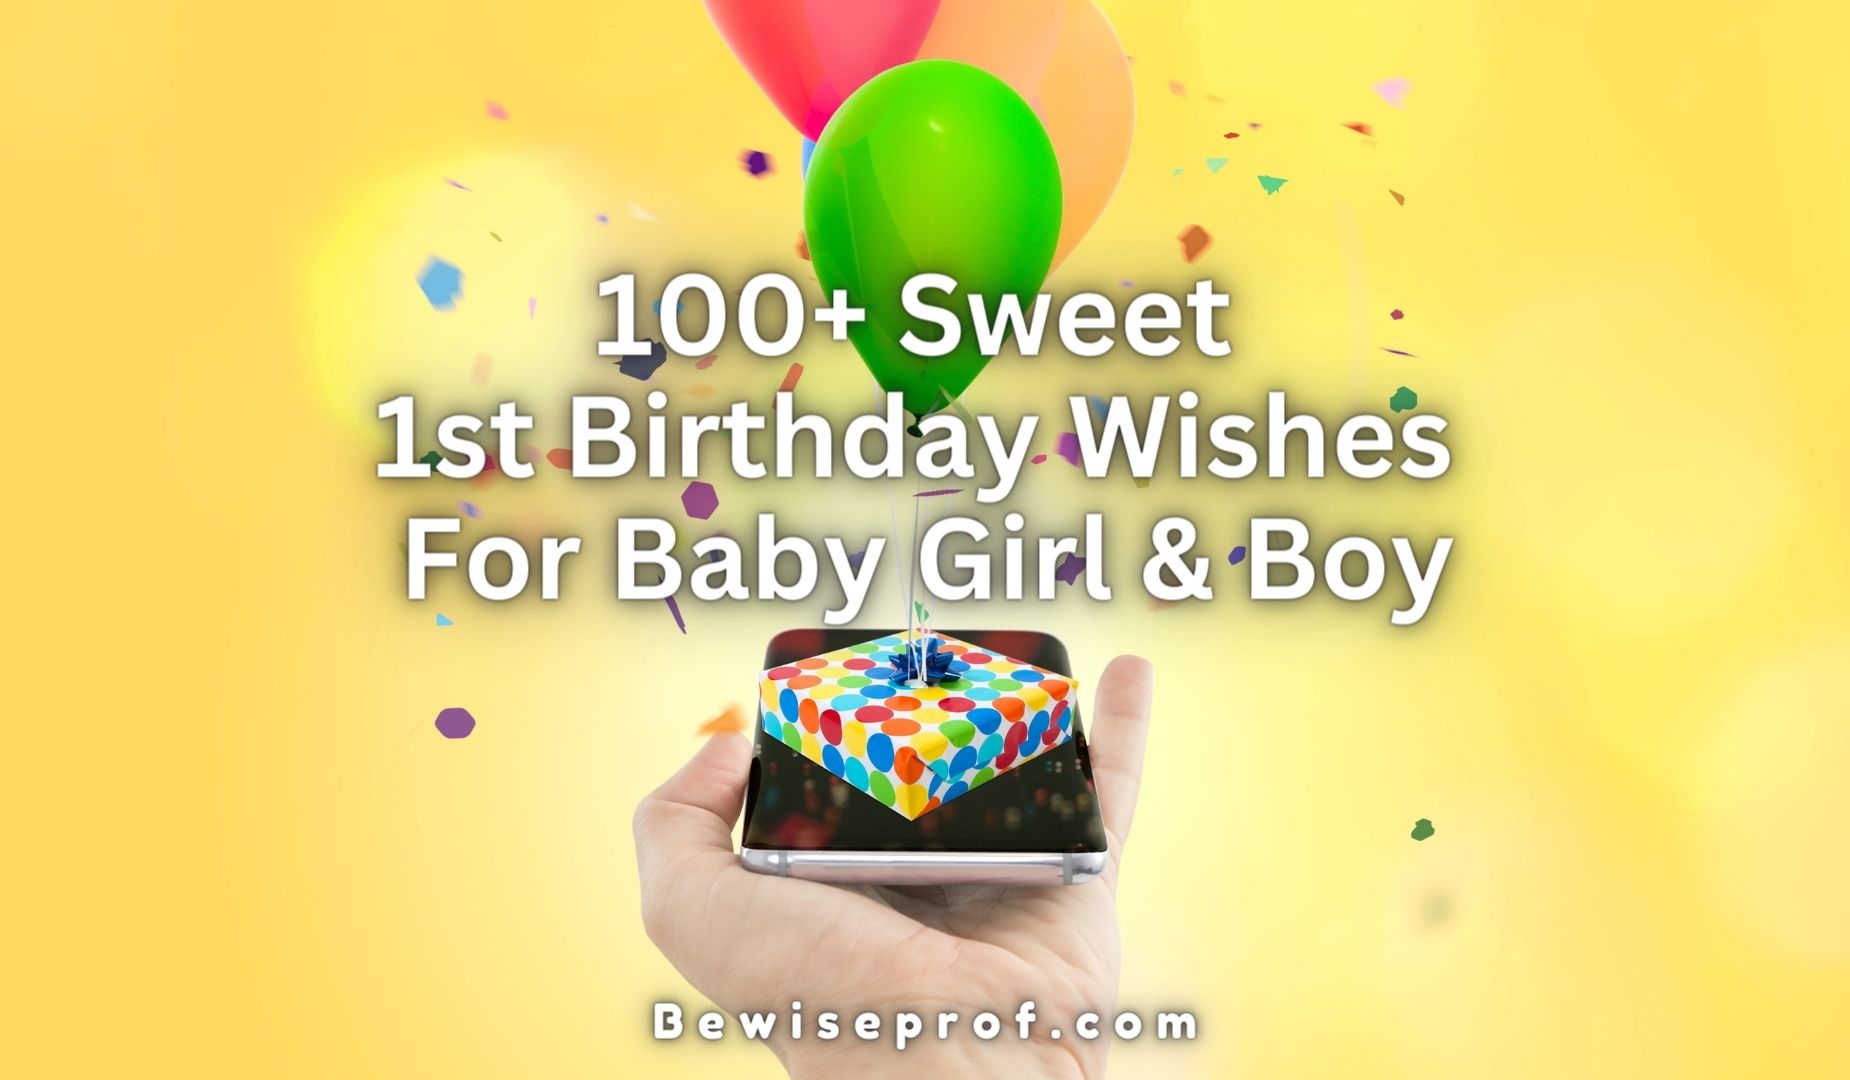 100+ Sweet 1st Birthday Wishes For Baby Girl And Boy